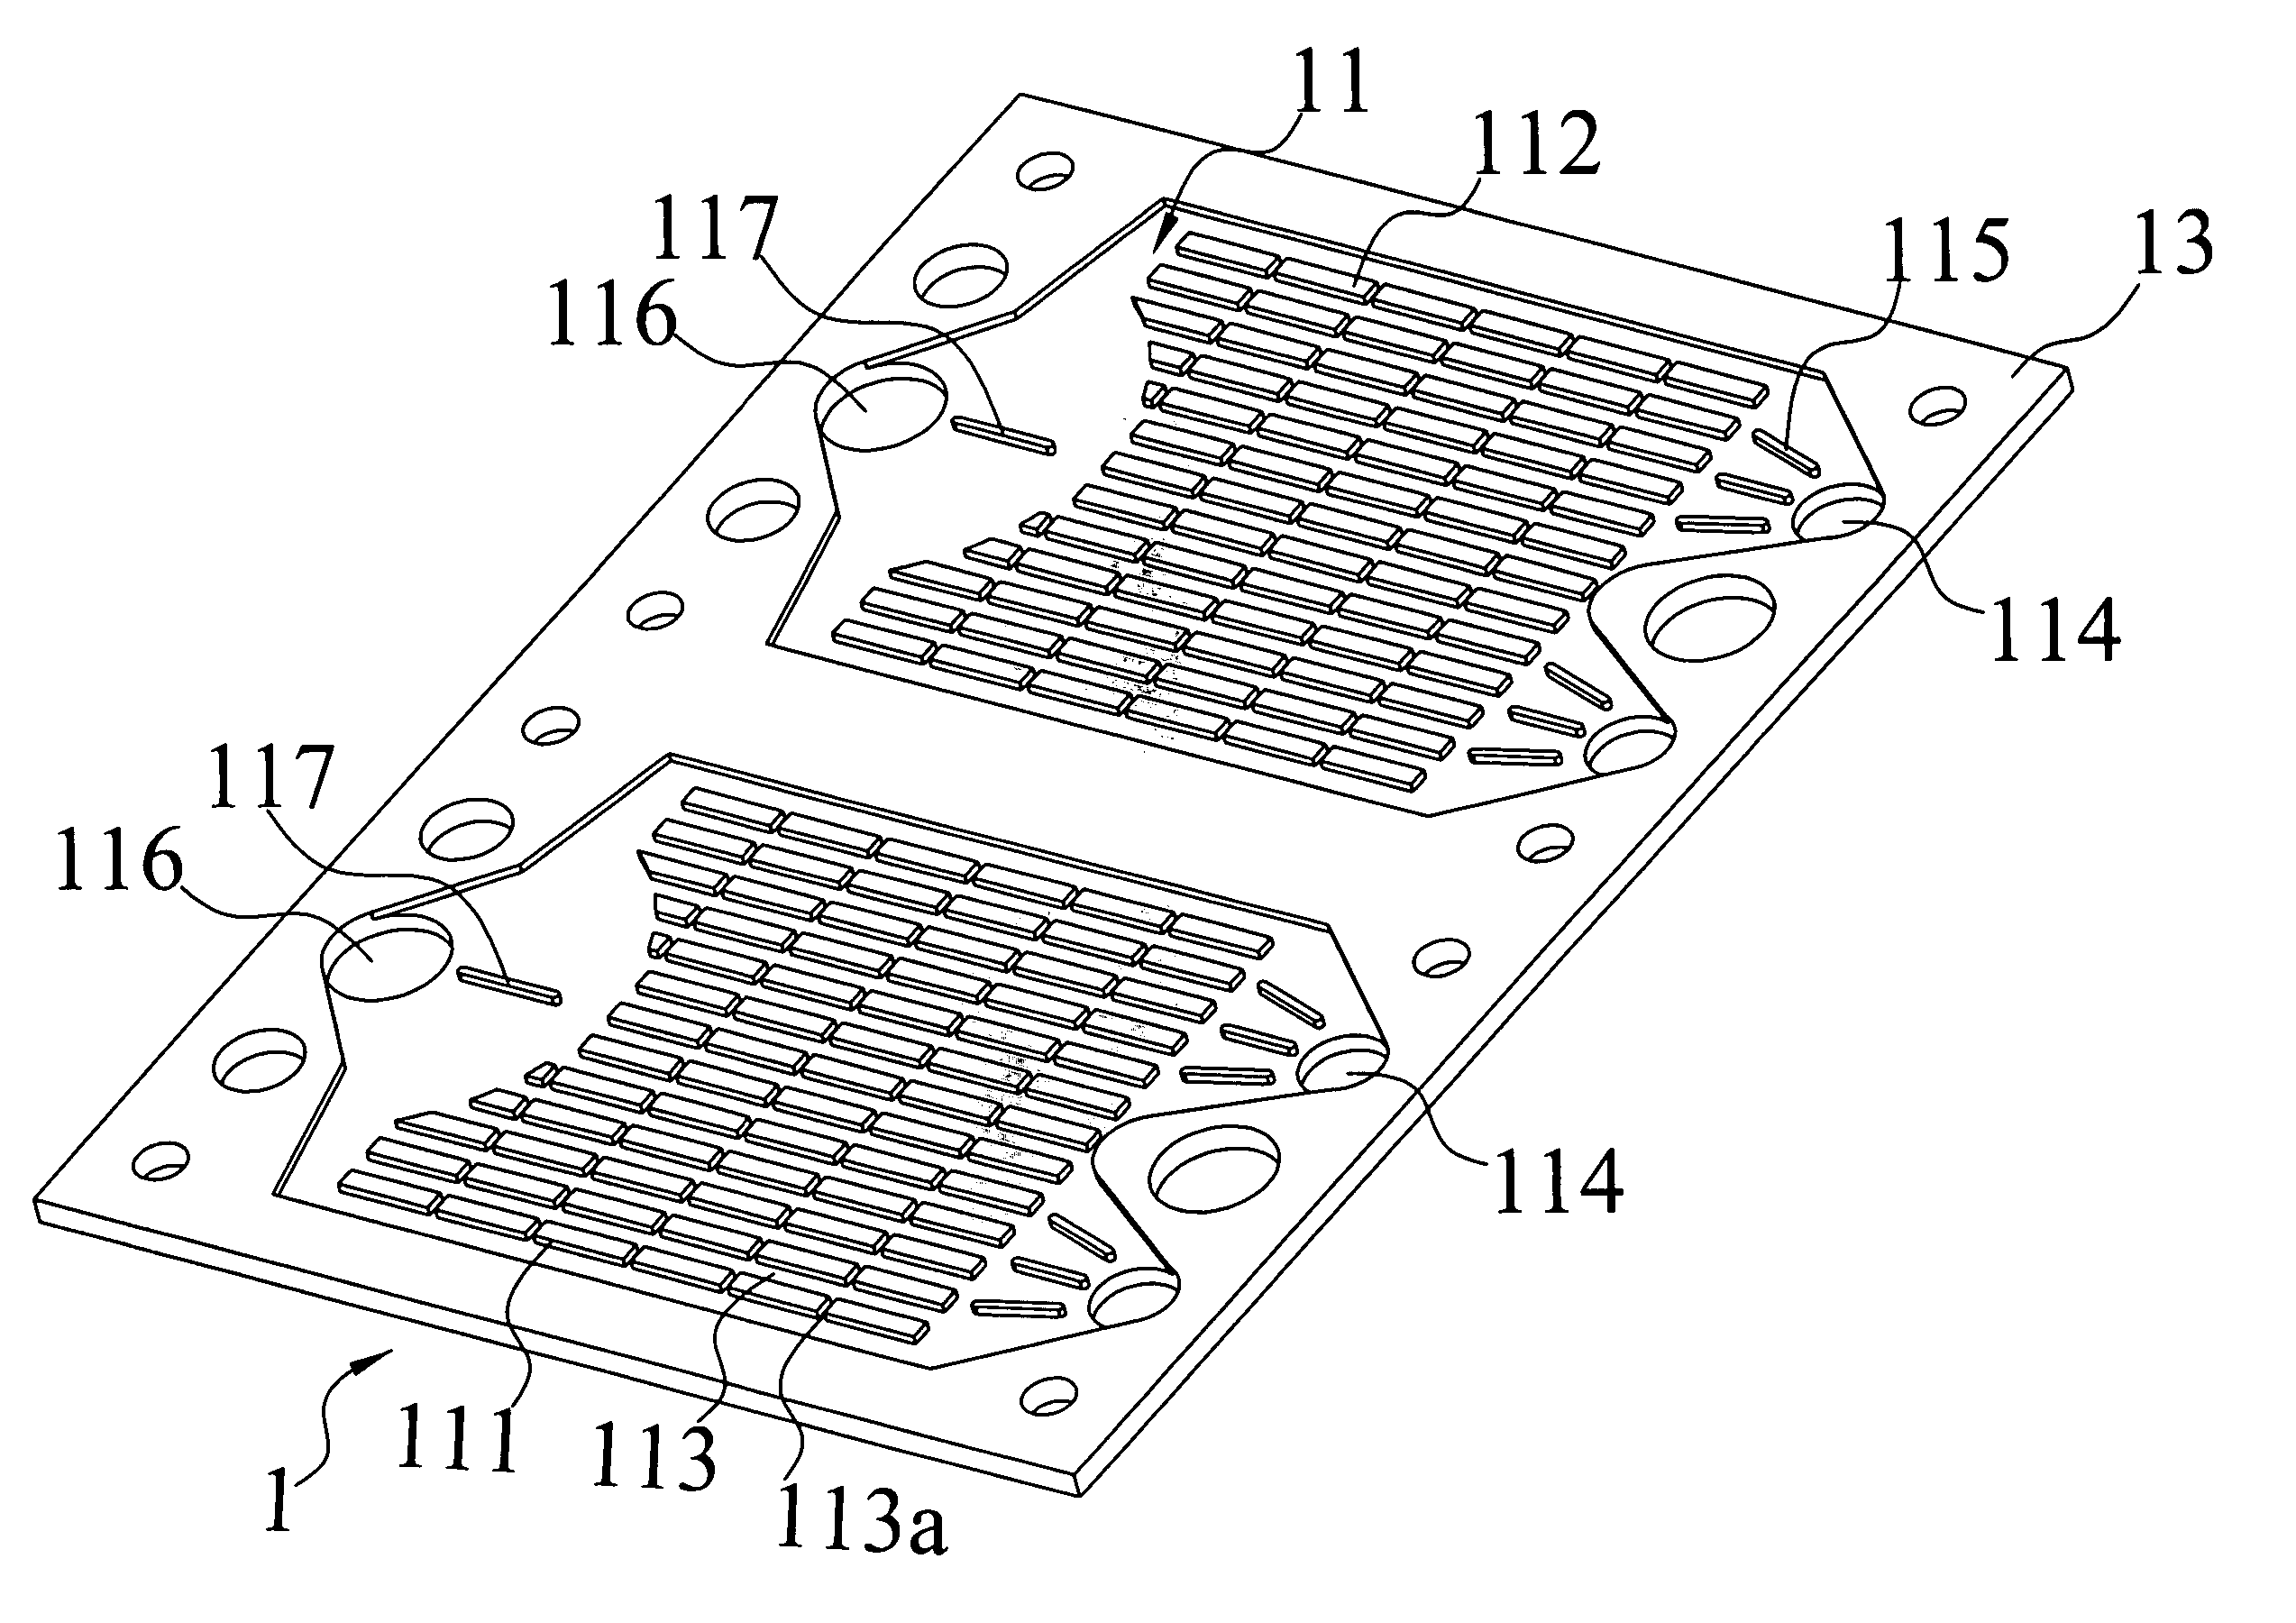 Interconnect set of planar solid oxide fuel cell having flow paths